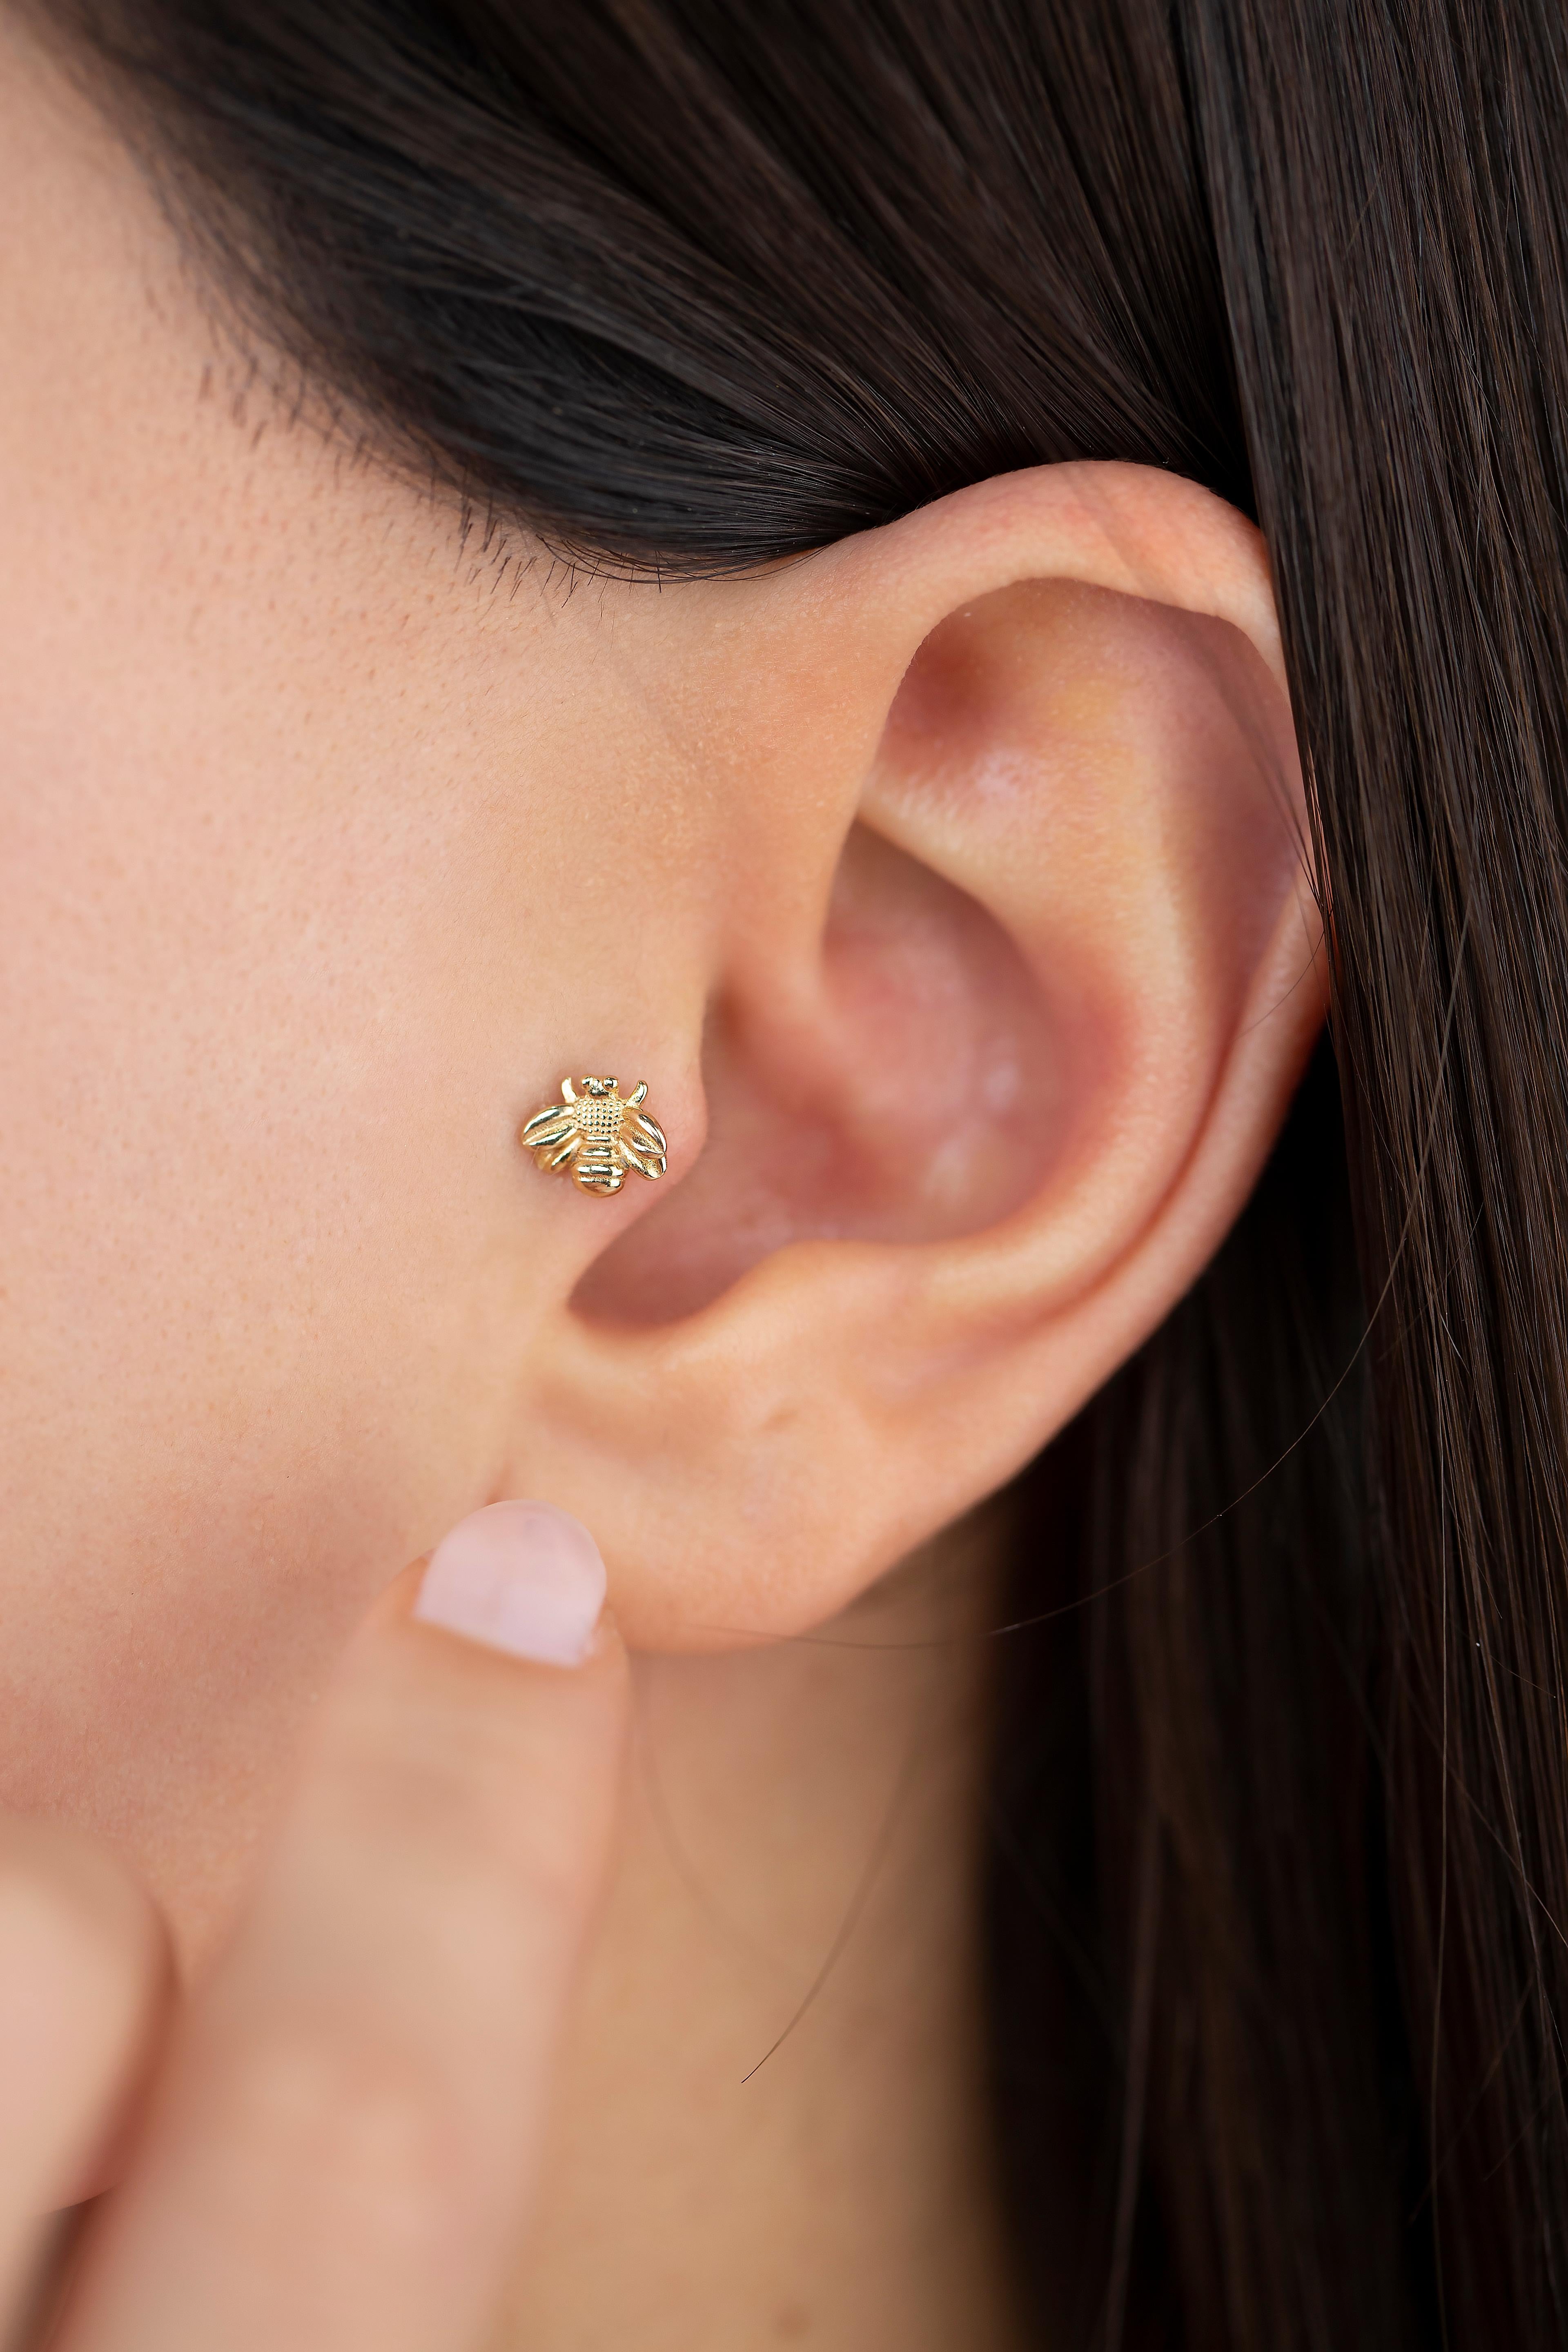 14K Gold Bee Piercing, Honeybee Gold Stud Earring

You can use the piercing as an earring too! Also this piercing is suitable for tragus, nose, helix, lobe, flat, medusa, monreo, labret and stud.

This piercing was made with quality materials and